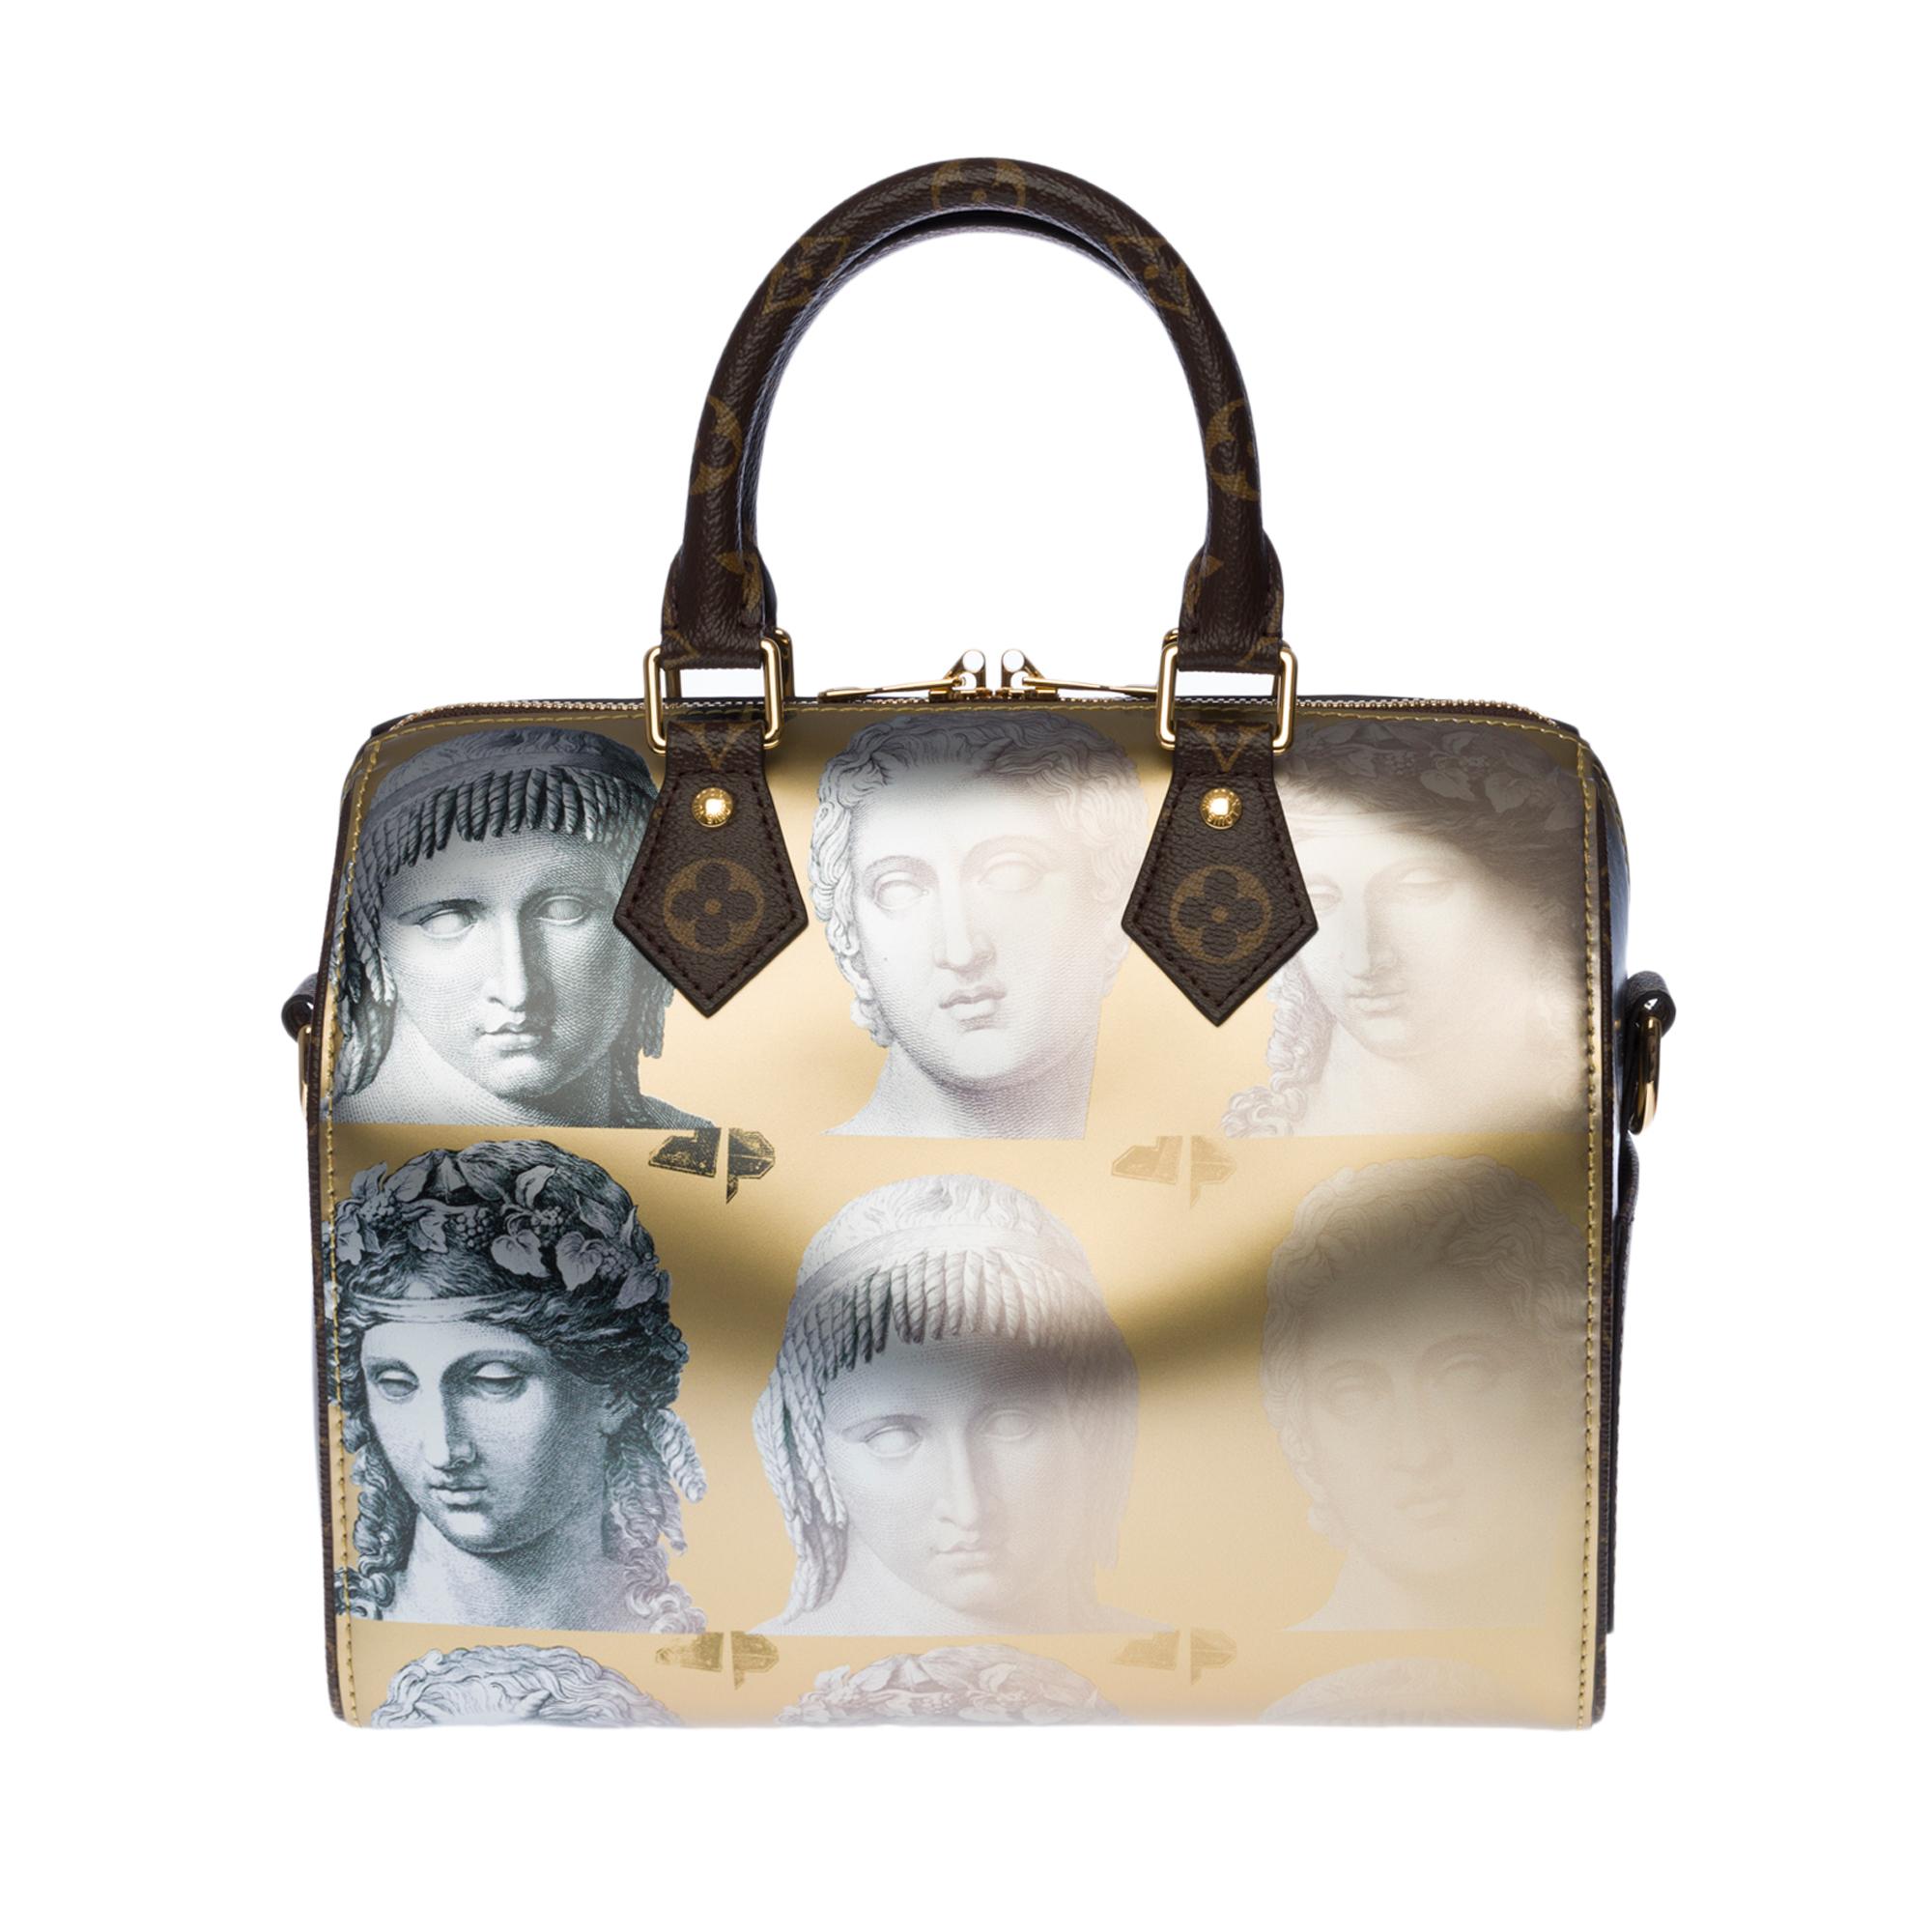 
LIMITED EDITION -ULTRA EXCLUSIVE - Fashion Week 2021

This Speedy Bandoulière 25 handbag is made from golden metallic leather adorned with prints of statue heads created by the famed Italian artist Piero Fornasetti. The trim in Monogram canvas and